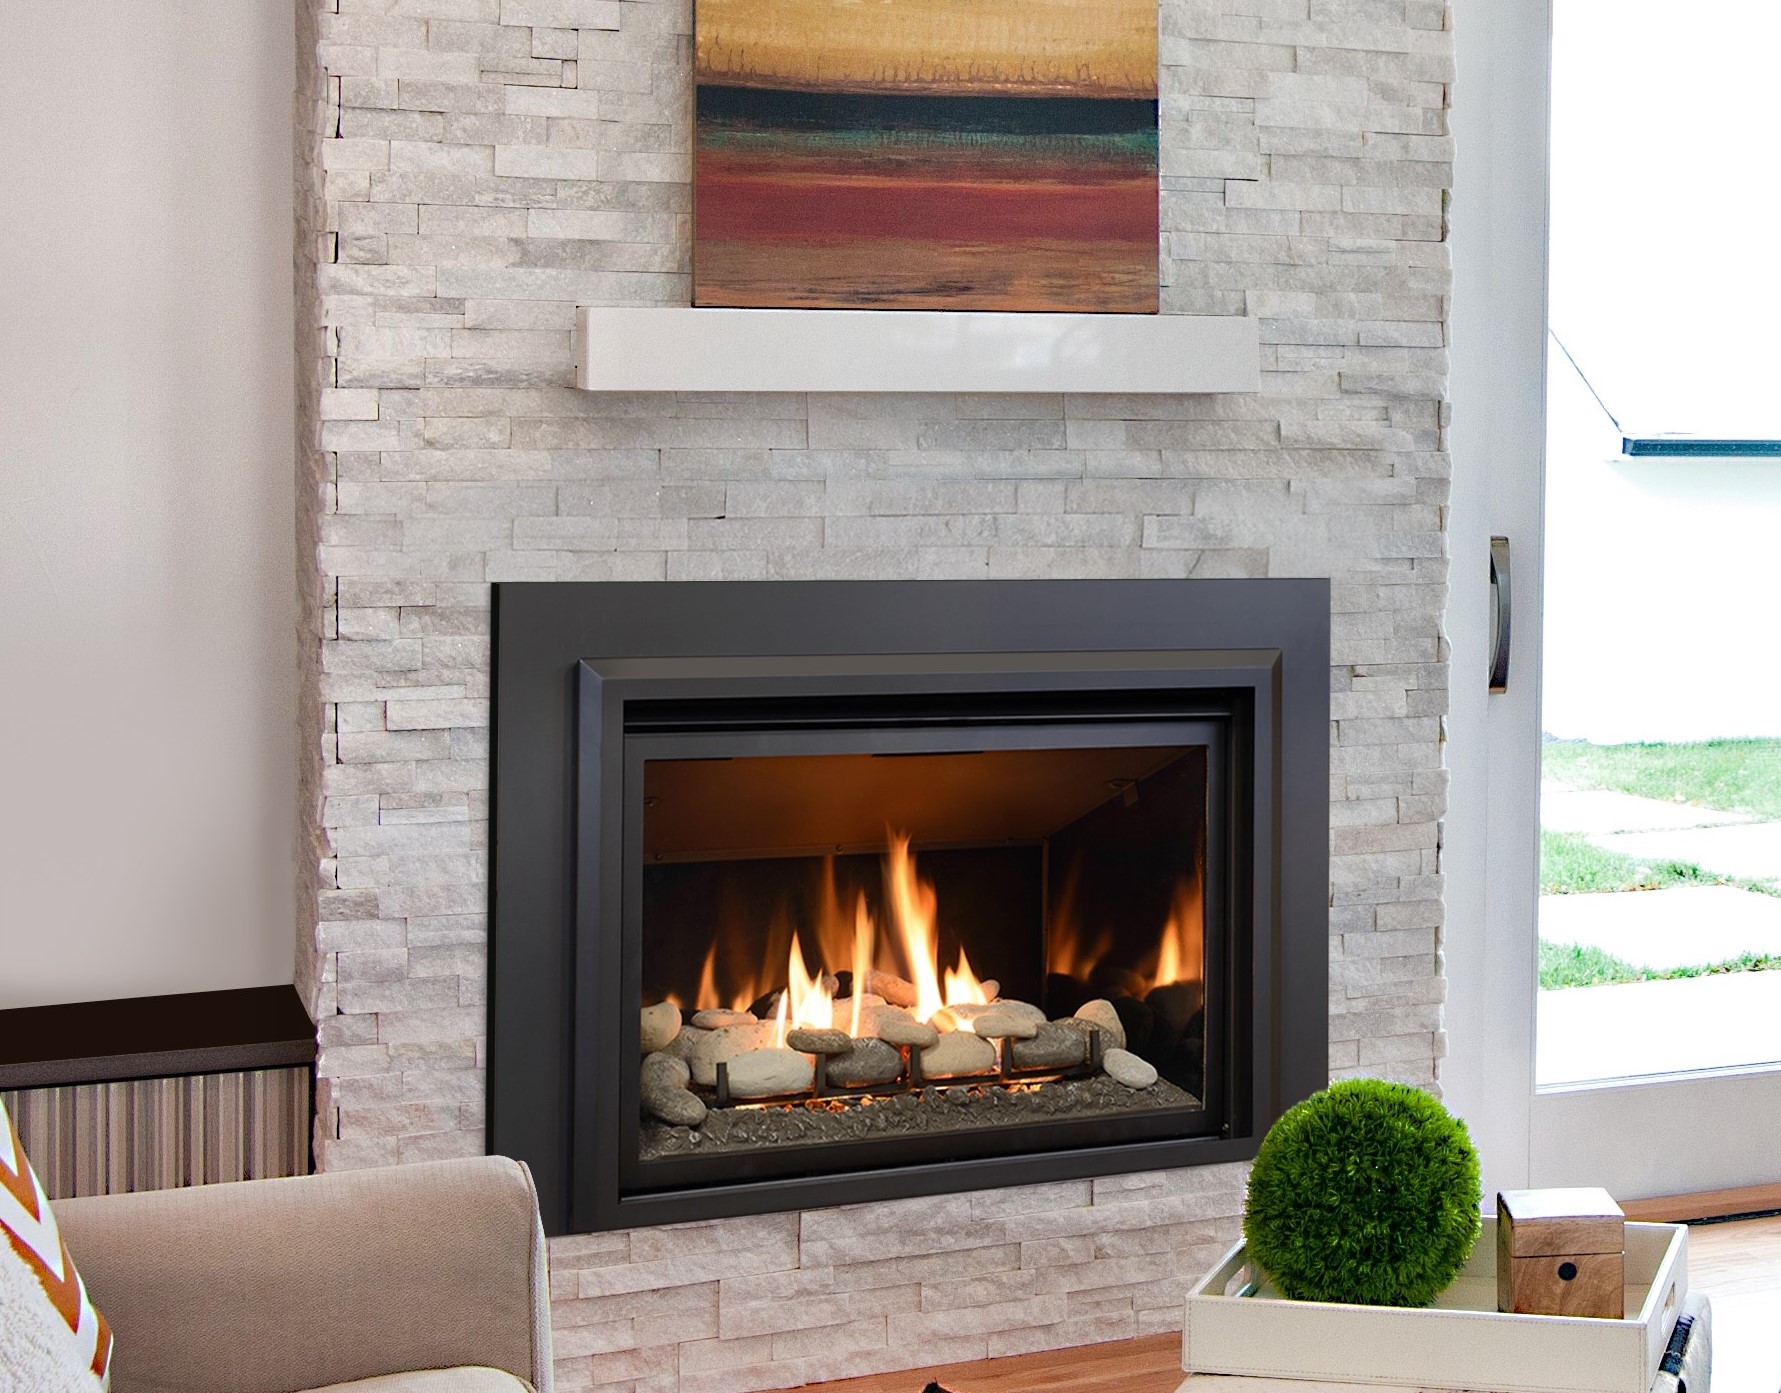 Rochester Fireplace Gas Wood, How To Upgrade A Gas Fireplace